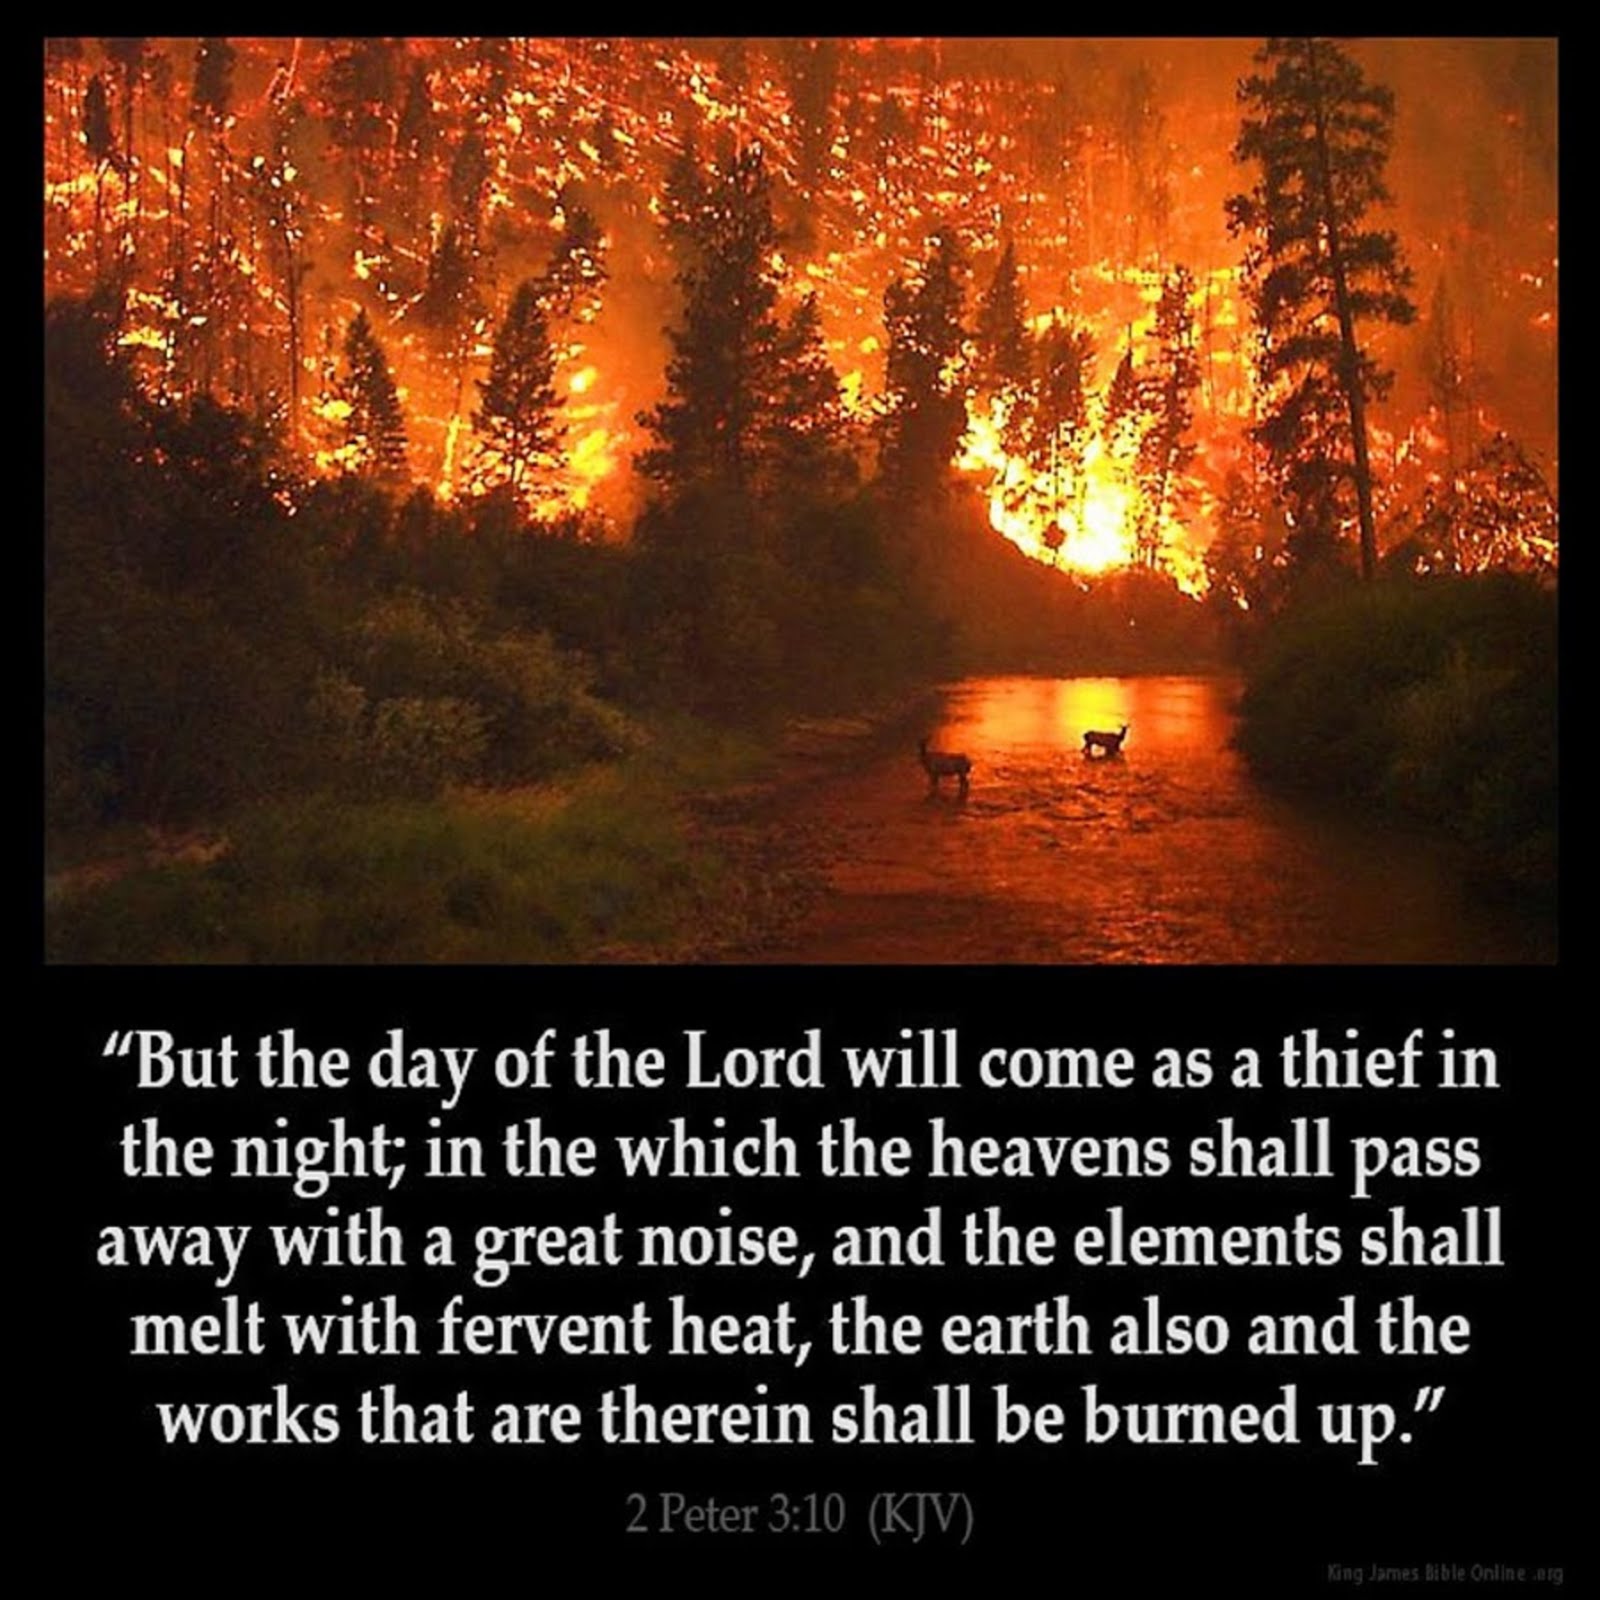 THE DAY OF THE LORD WILL COME LIKE A THIEF IN THE NIGHT